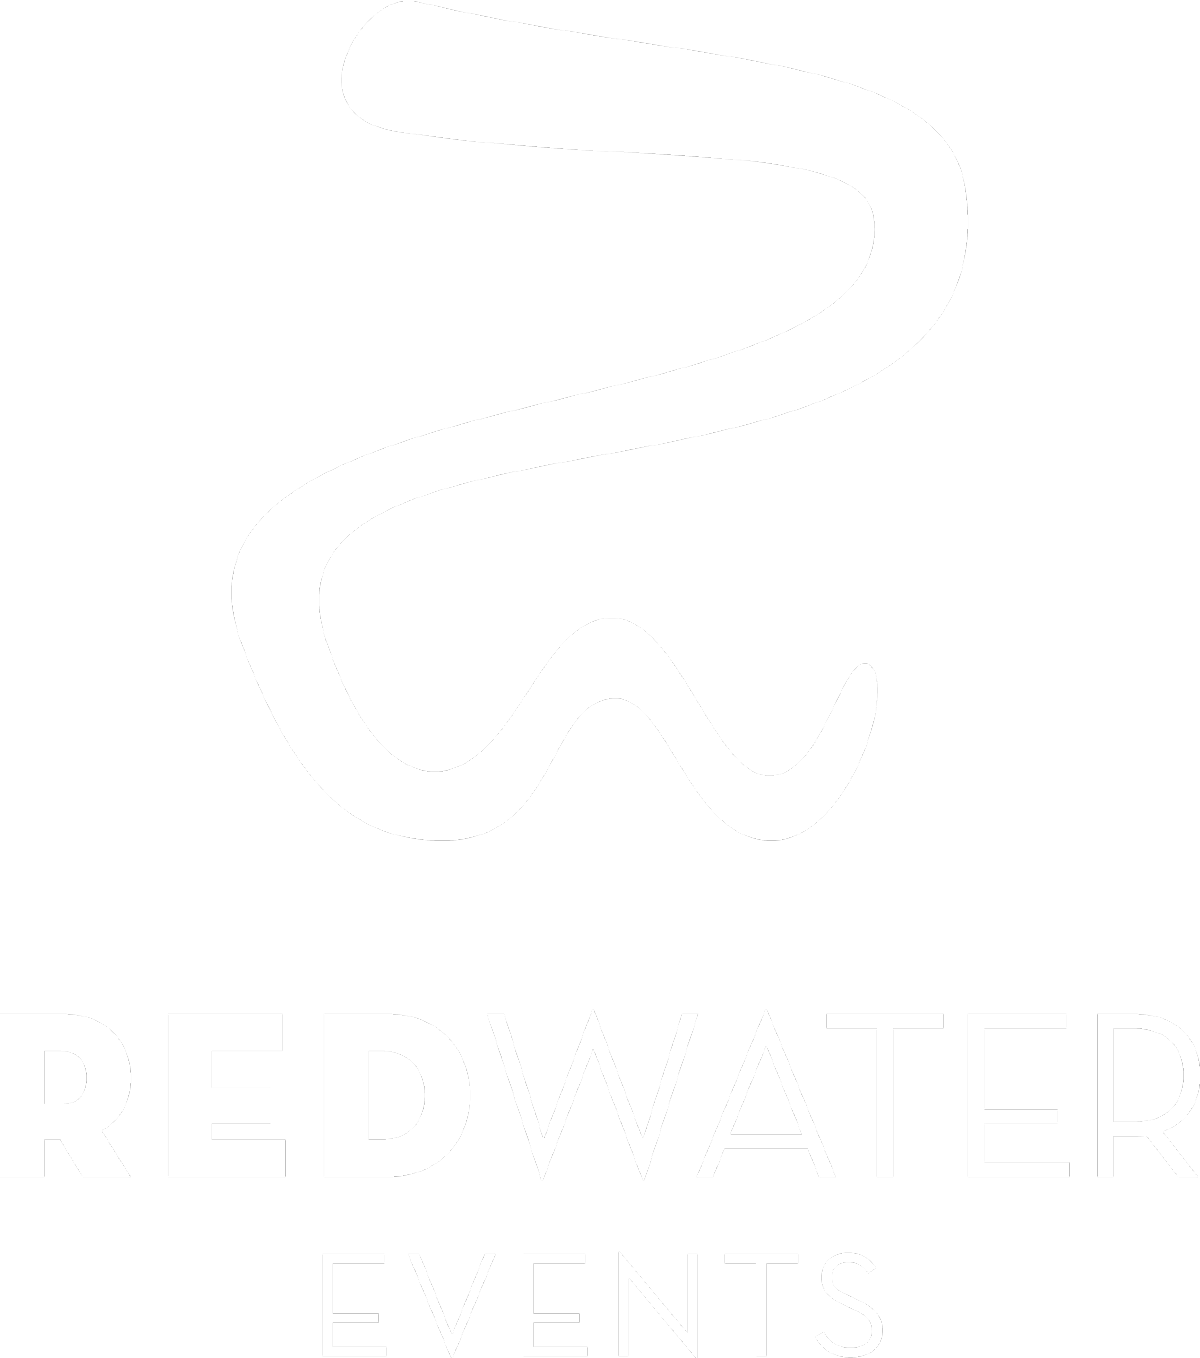 RedWater Events logo